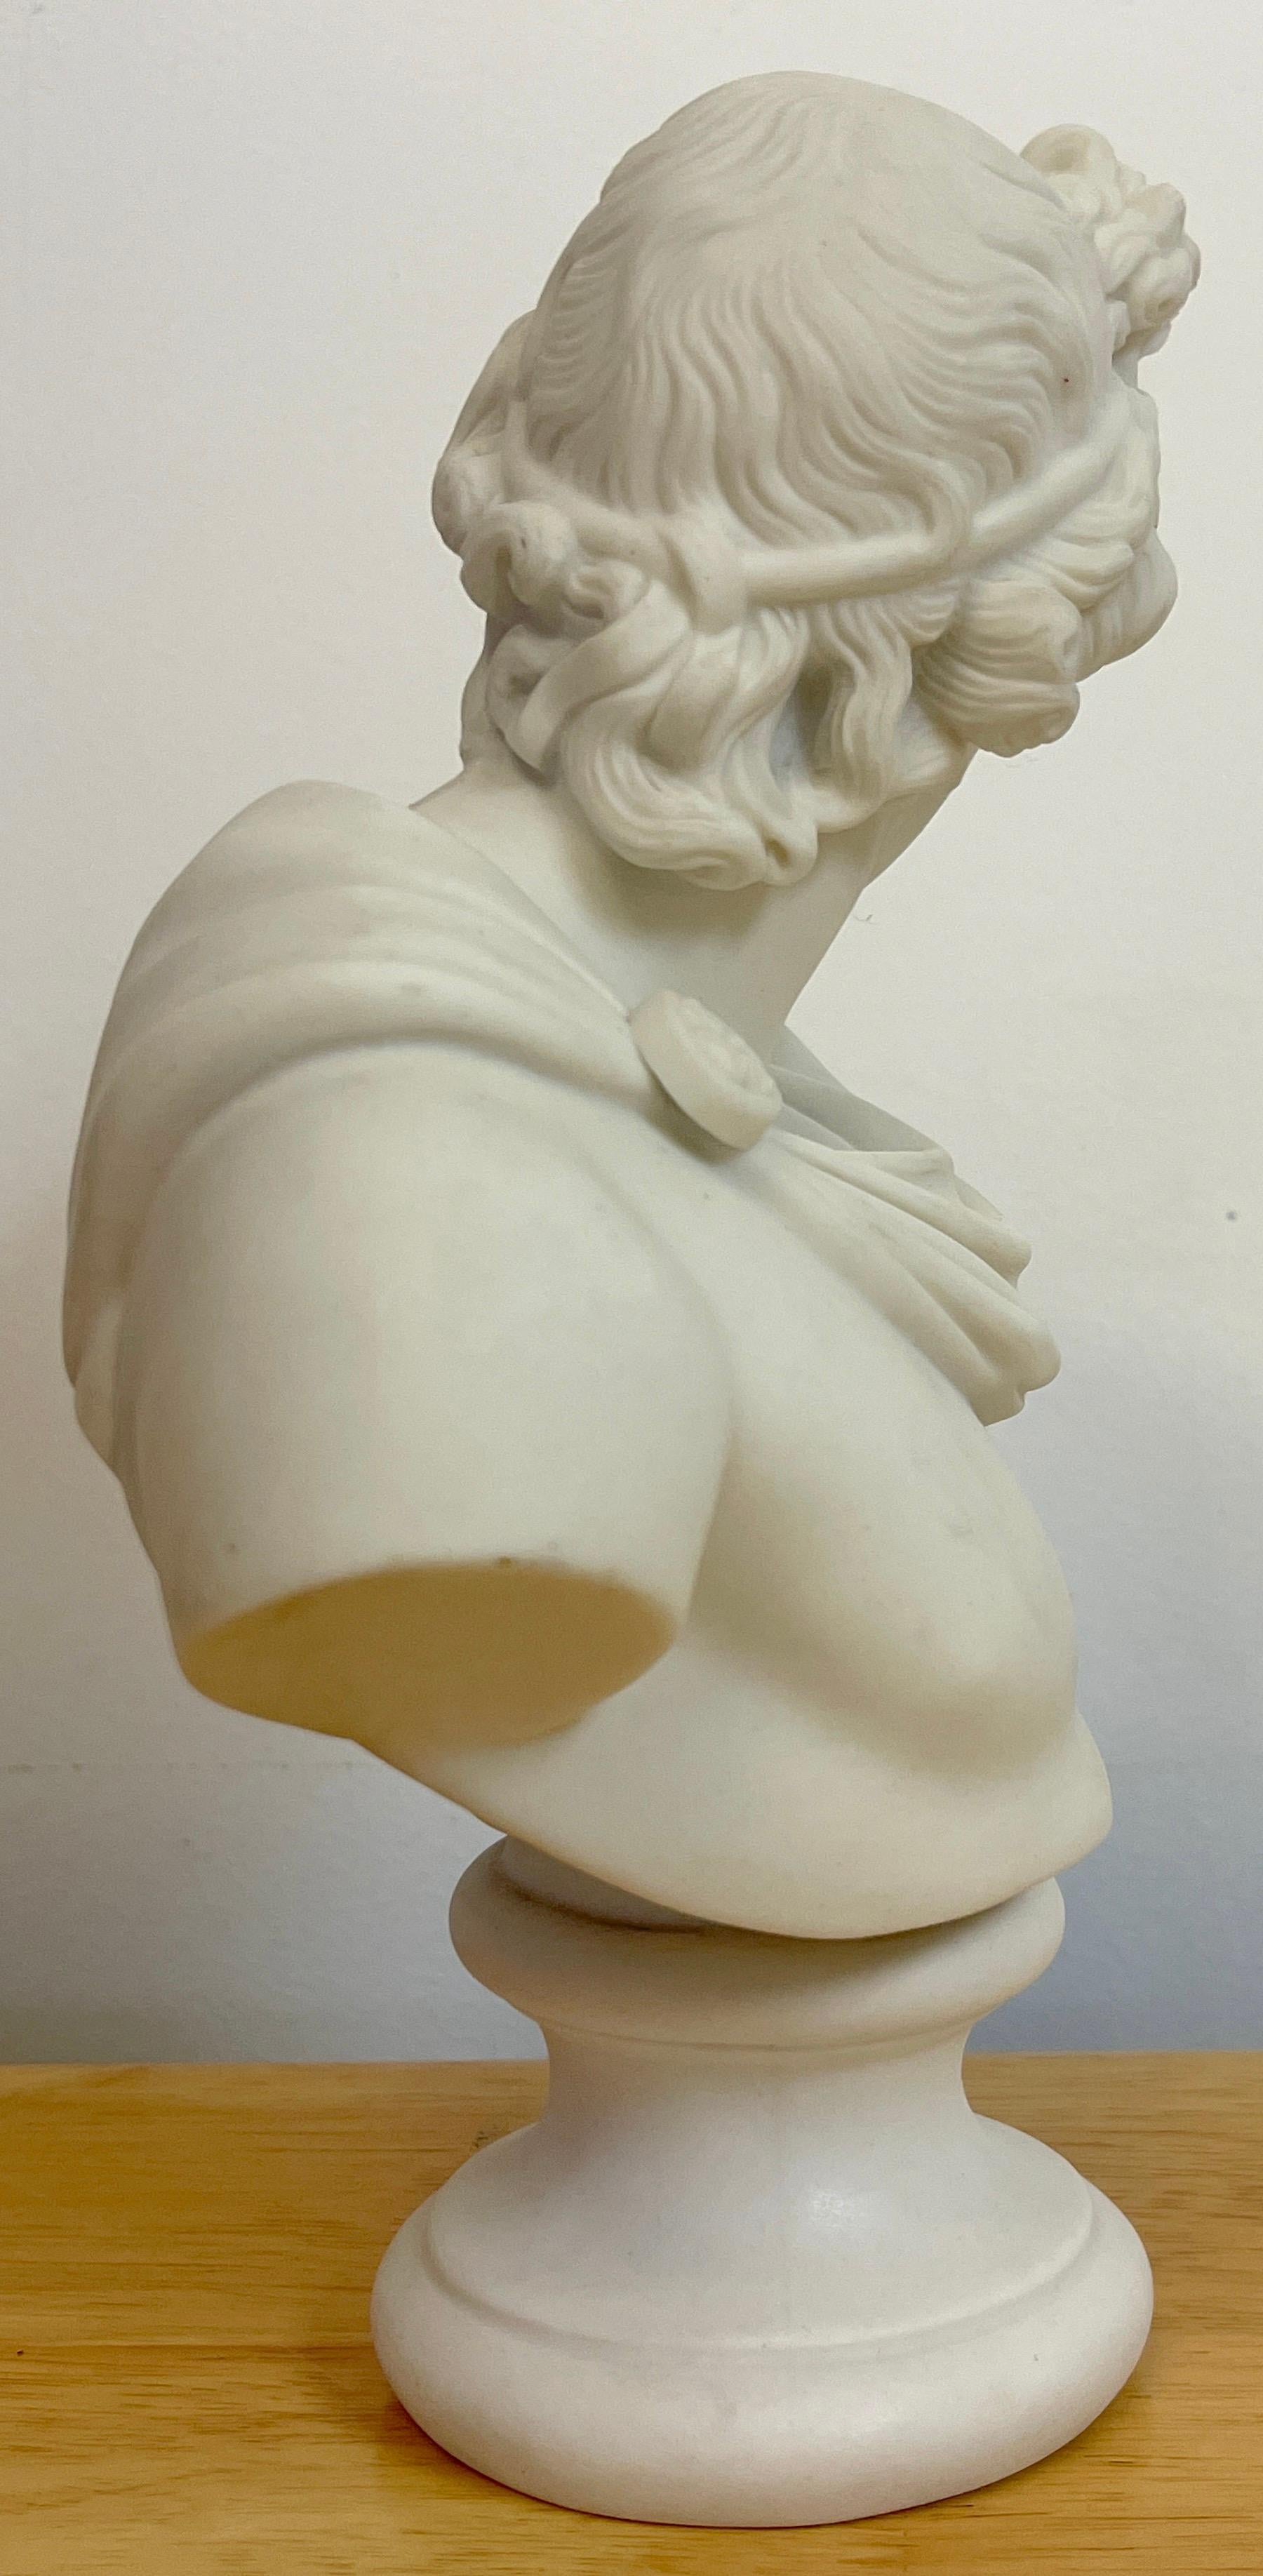 19th Century English Diminutive Parian Bust of Apollo Belvedere For Sale 2